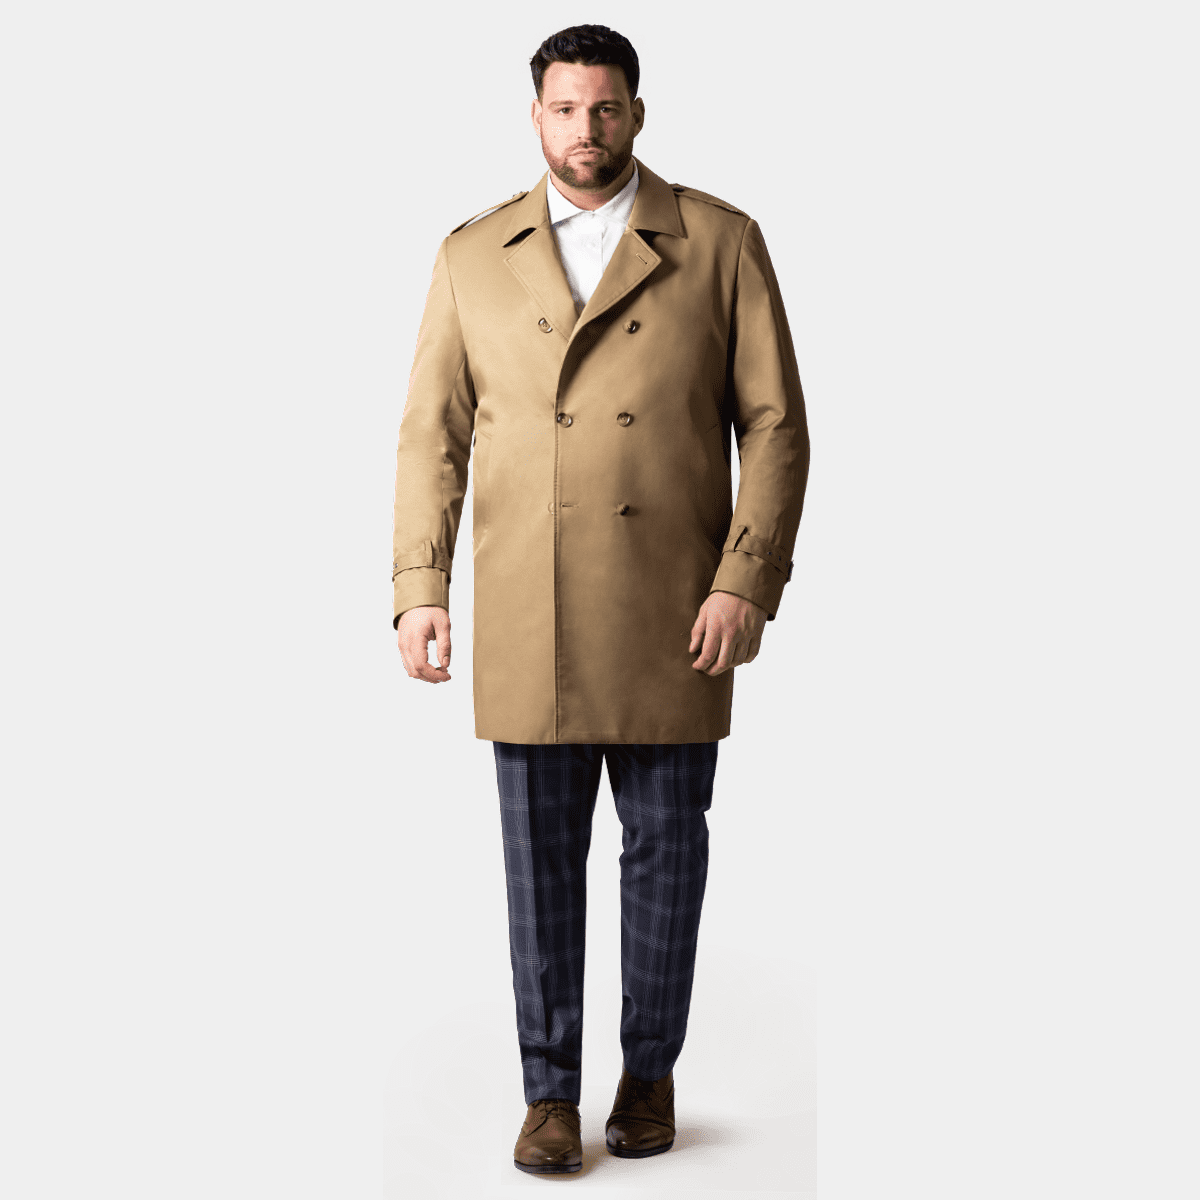 Big and Tall Trench Coats for Men - Hockerty